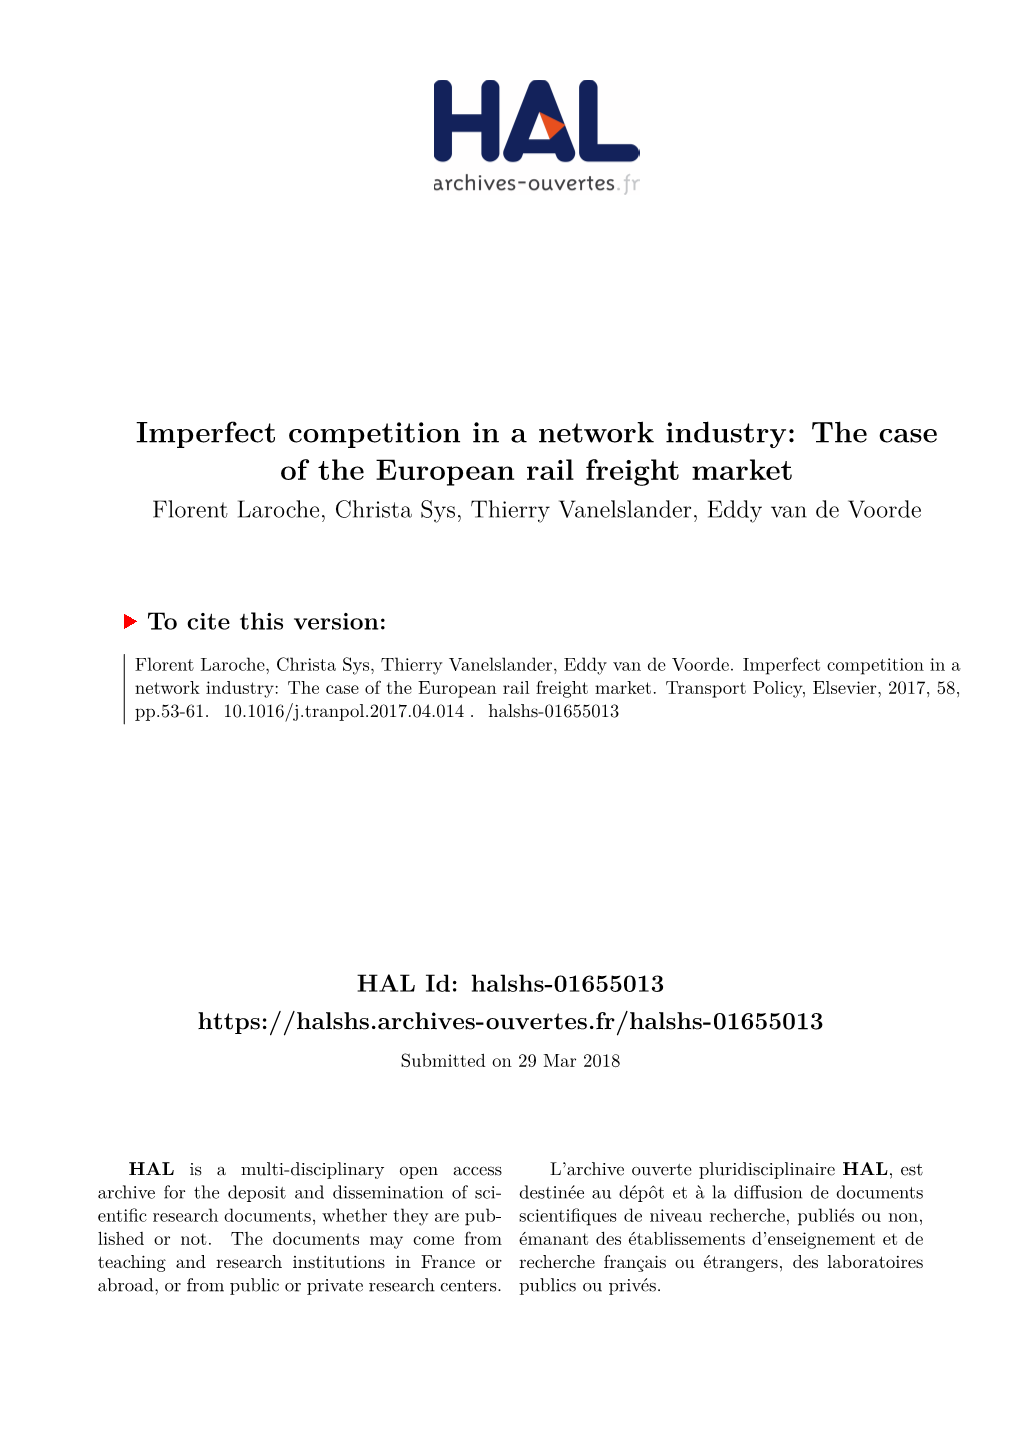 Imperfect Competition in a Network Industry: the Case of the European Rail Freight Market Florent Laroche, Christa Sys, Thierry Vanelslander, Eddy Van De Voorde